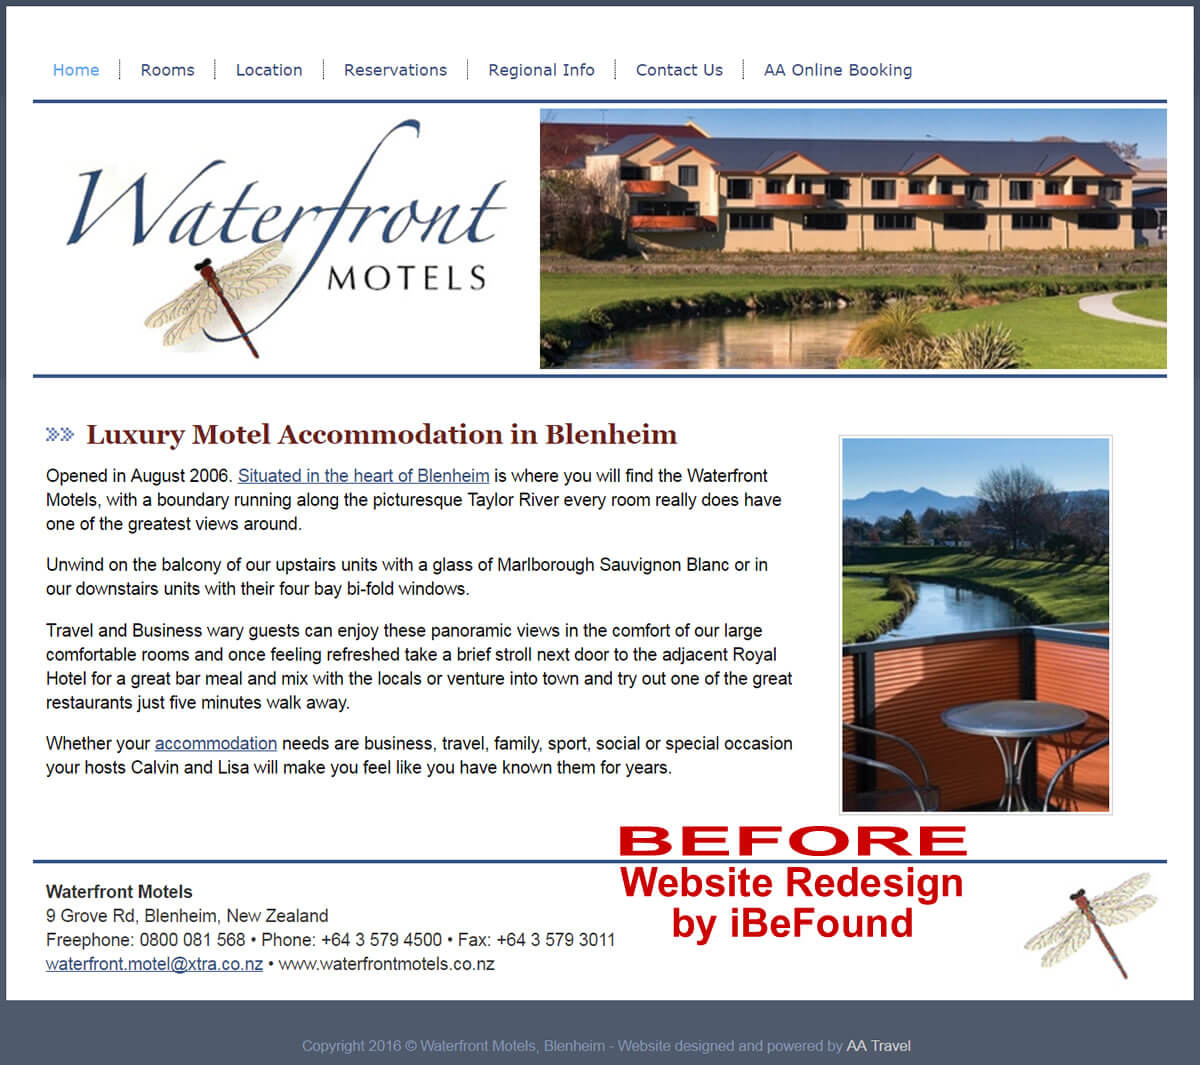 Homepage Of Waterfront Motels Before Website Redesign By iBeFound